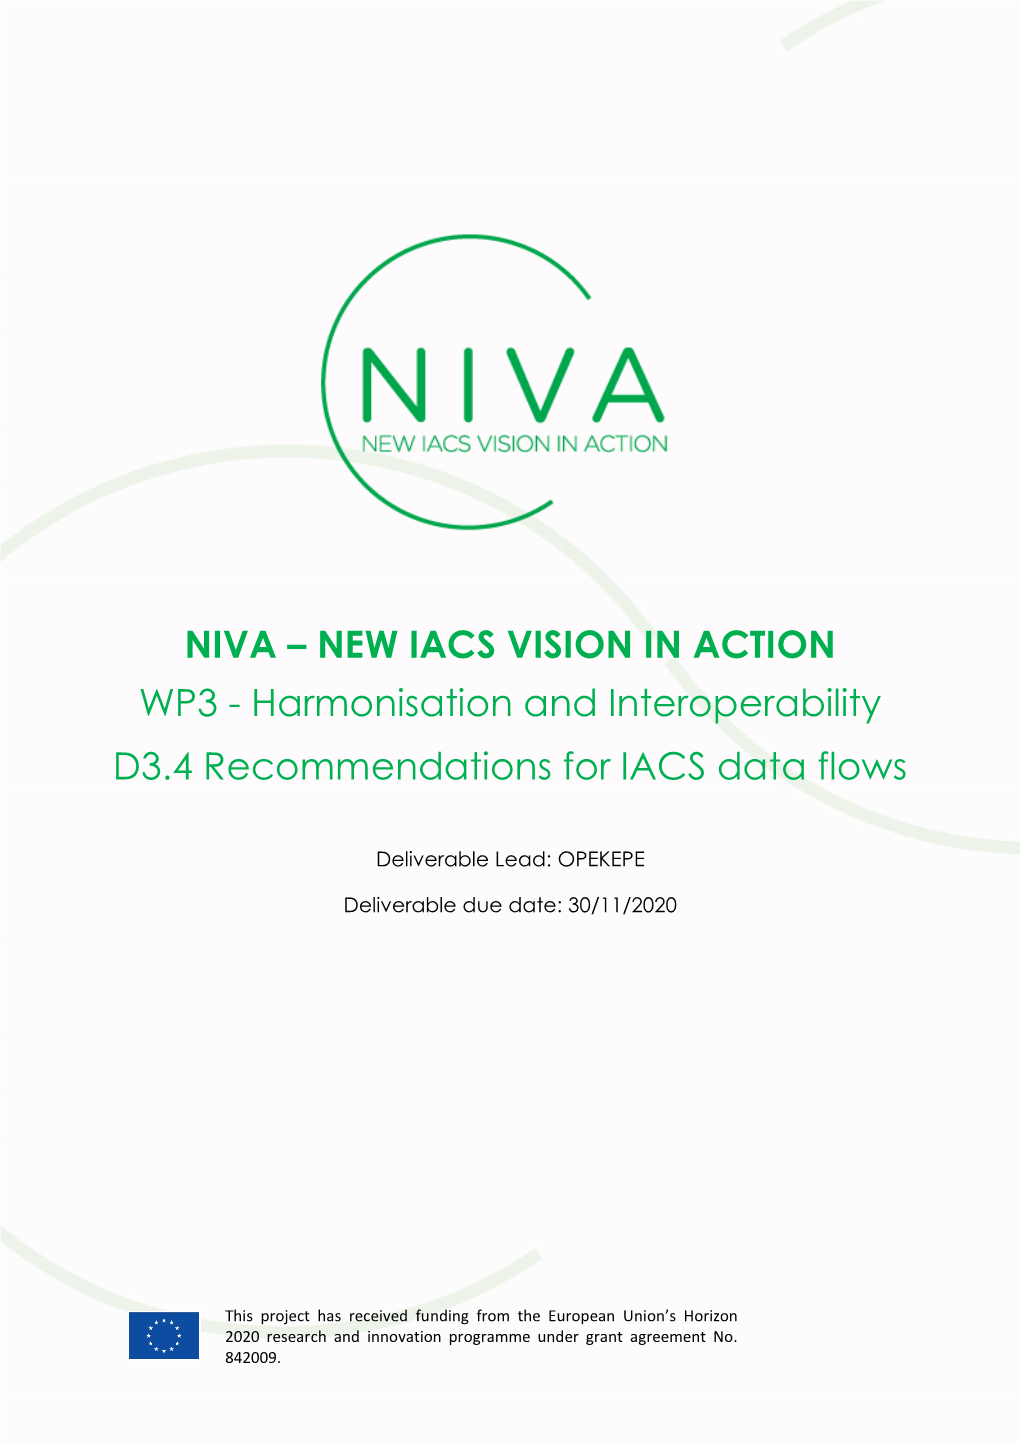 Niva – New Iacs Vision in Action